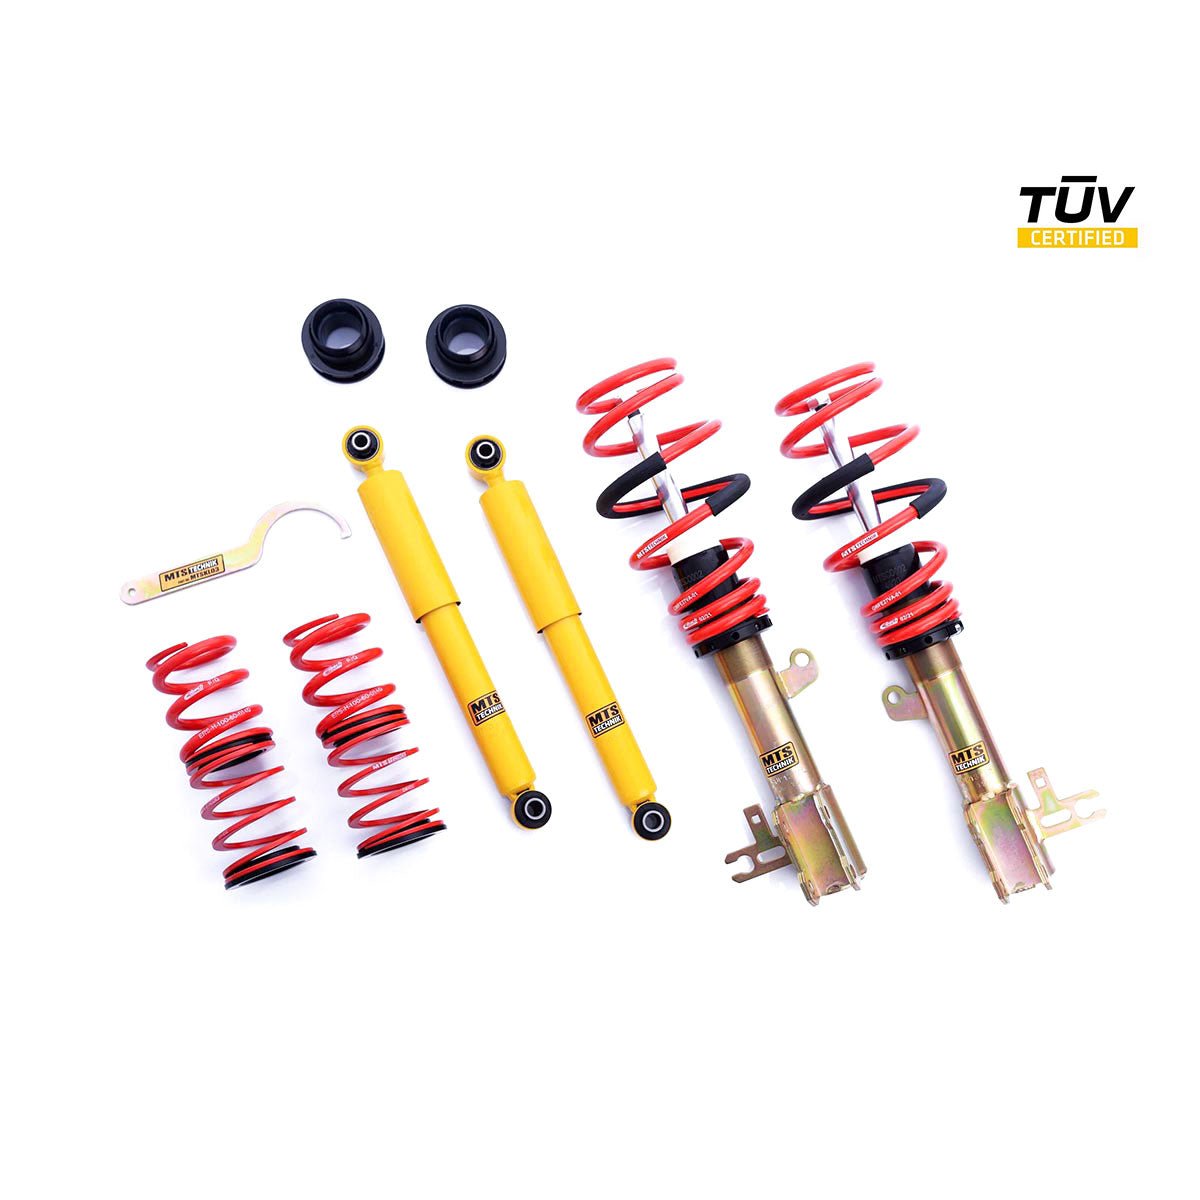 MTS TECHNIK coilover kit SPORT Opel Astra H Limousine (with TÜV) - PARTS33 GmbH